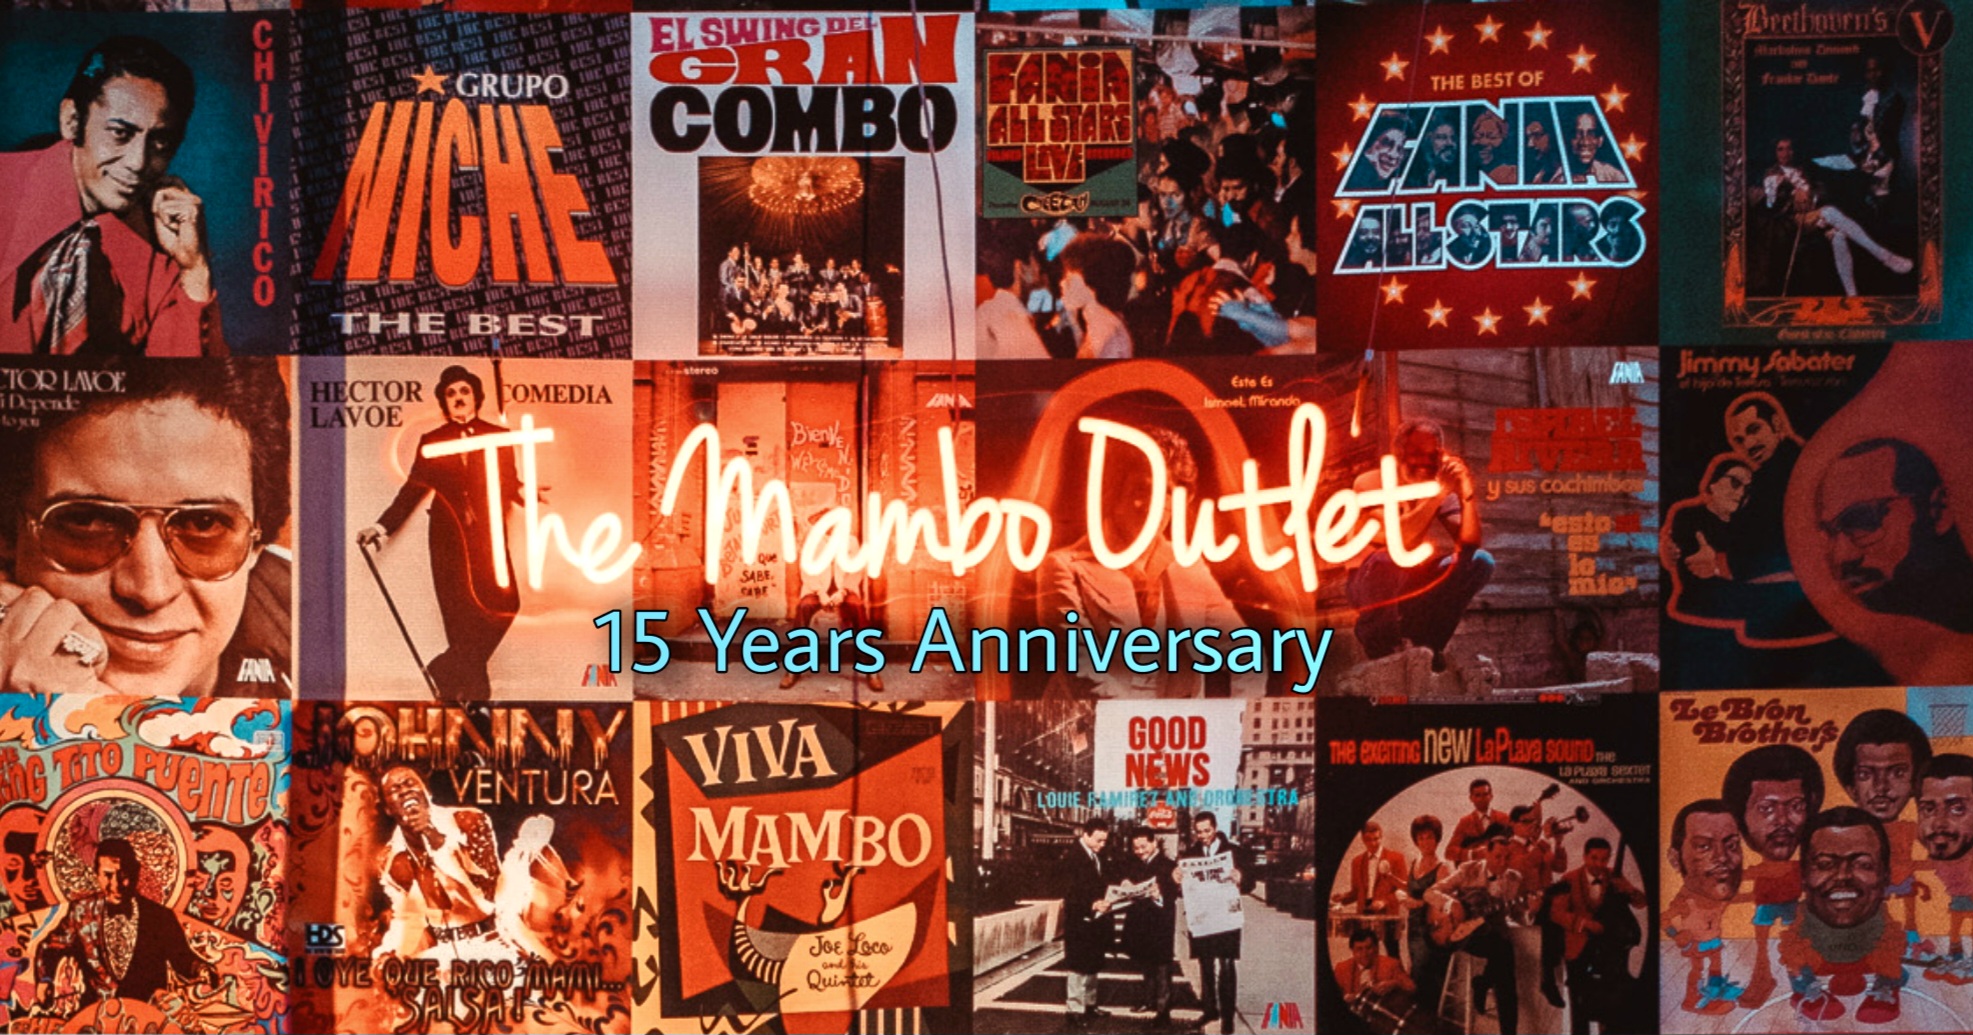 The Mambo Outlet 15 Year Anniversary! – Eileen Morales & David Cuevas – 2-HR Workshop – Saturday, May 18, 2024